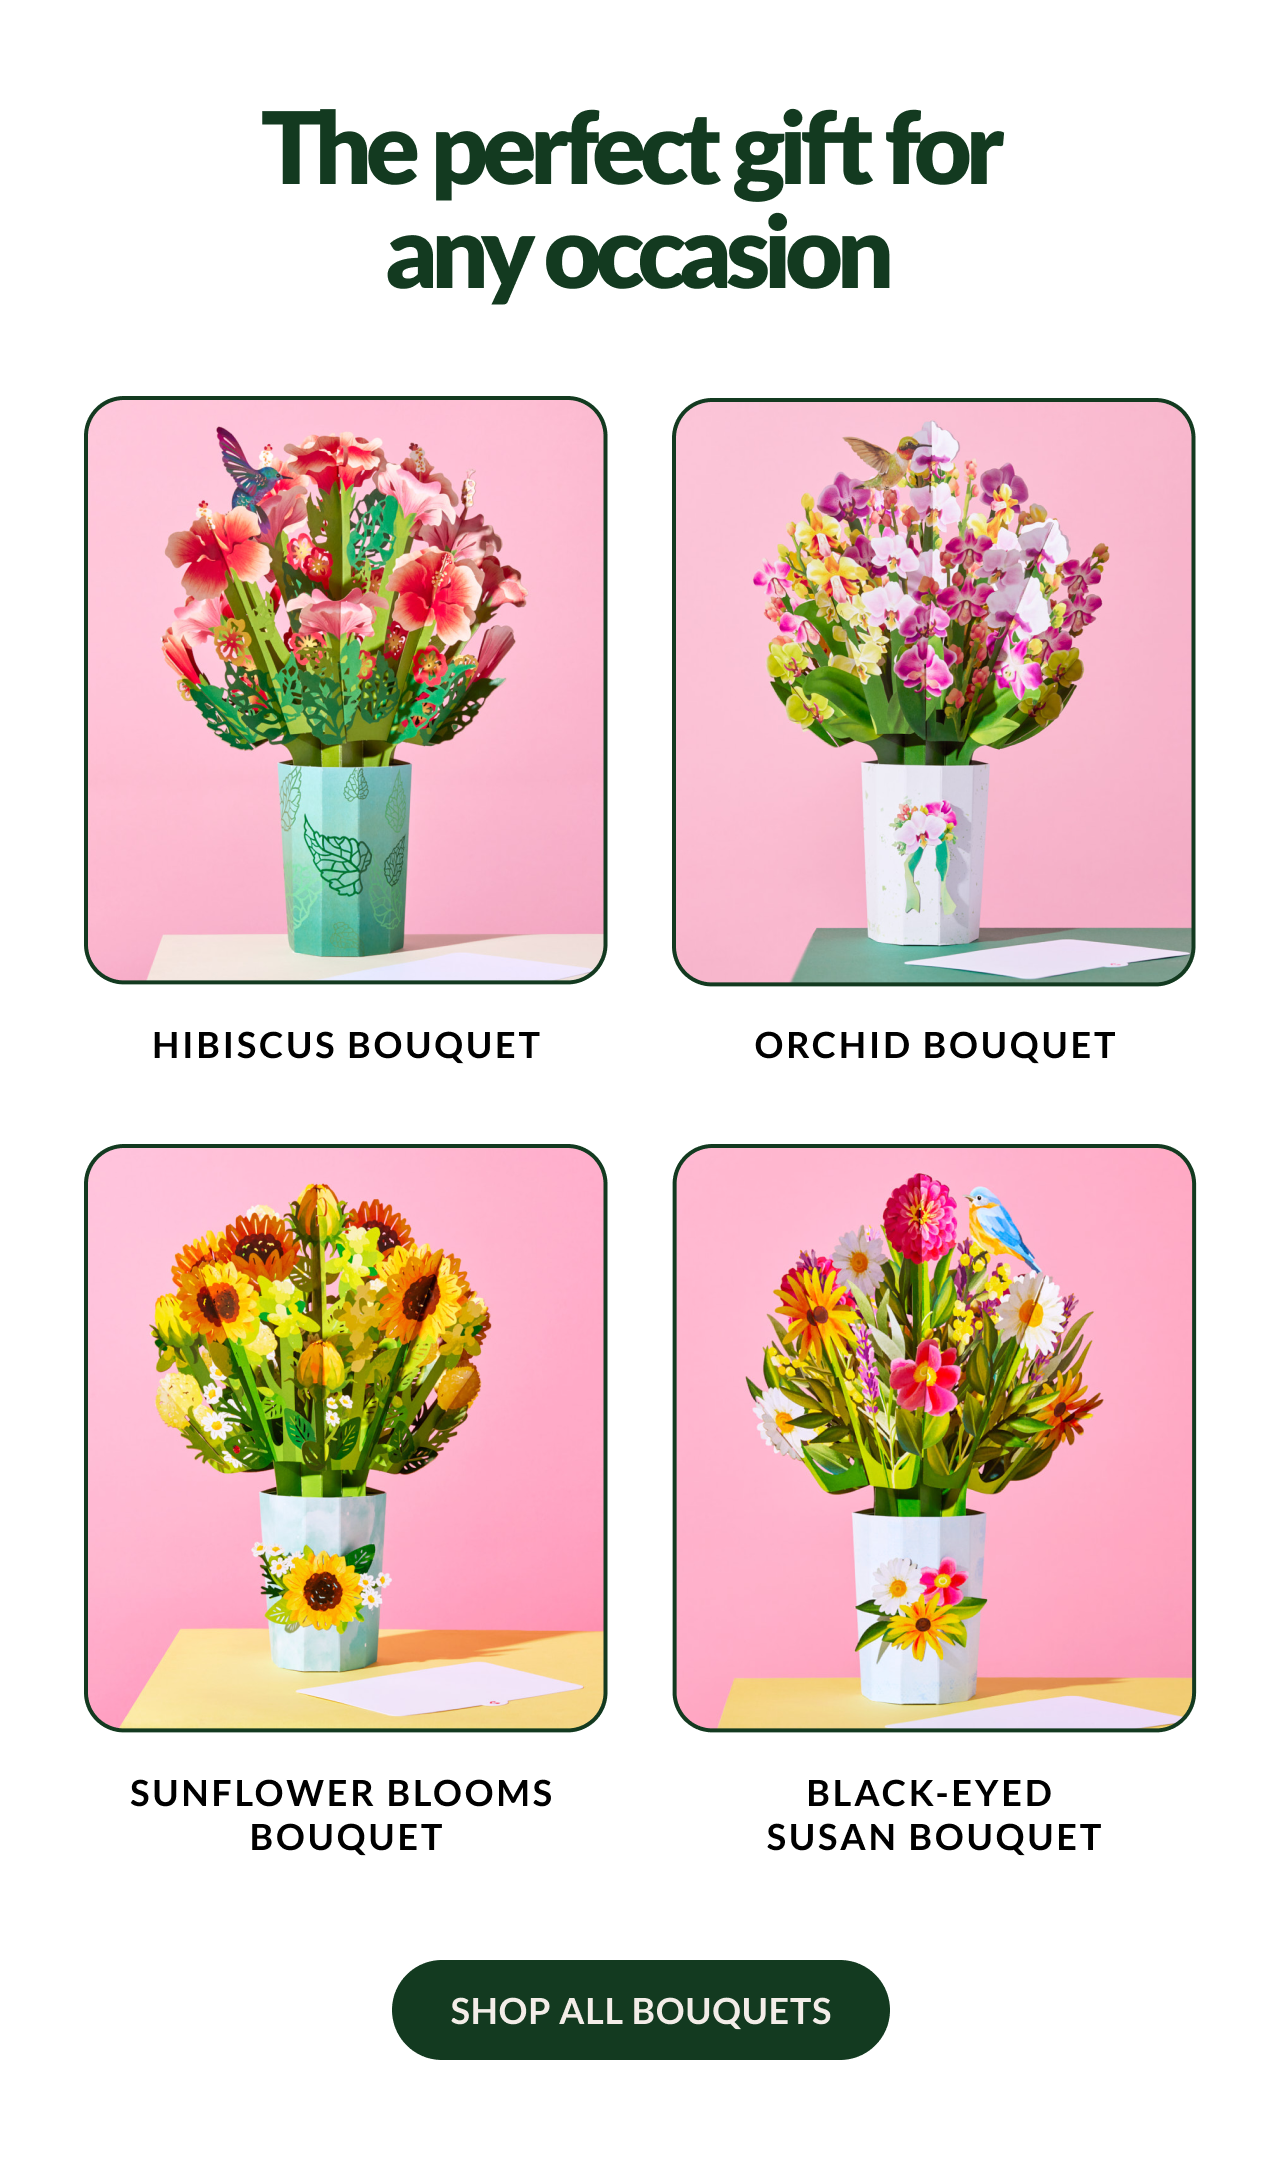 The perfect gift for any occasion | HIBISCUS BOUQUET | ORCHID BOUQUET | SUNFLOWER BLOOMS BOUQUET | BLACK-EYED SUSAN BOUQUET | SHOP ALL BOUQUETS